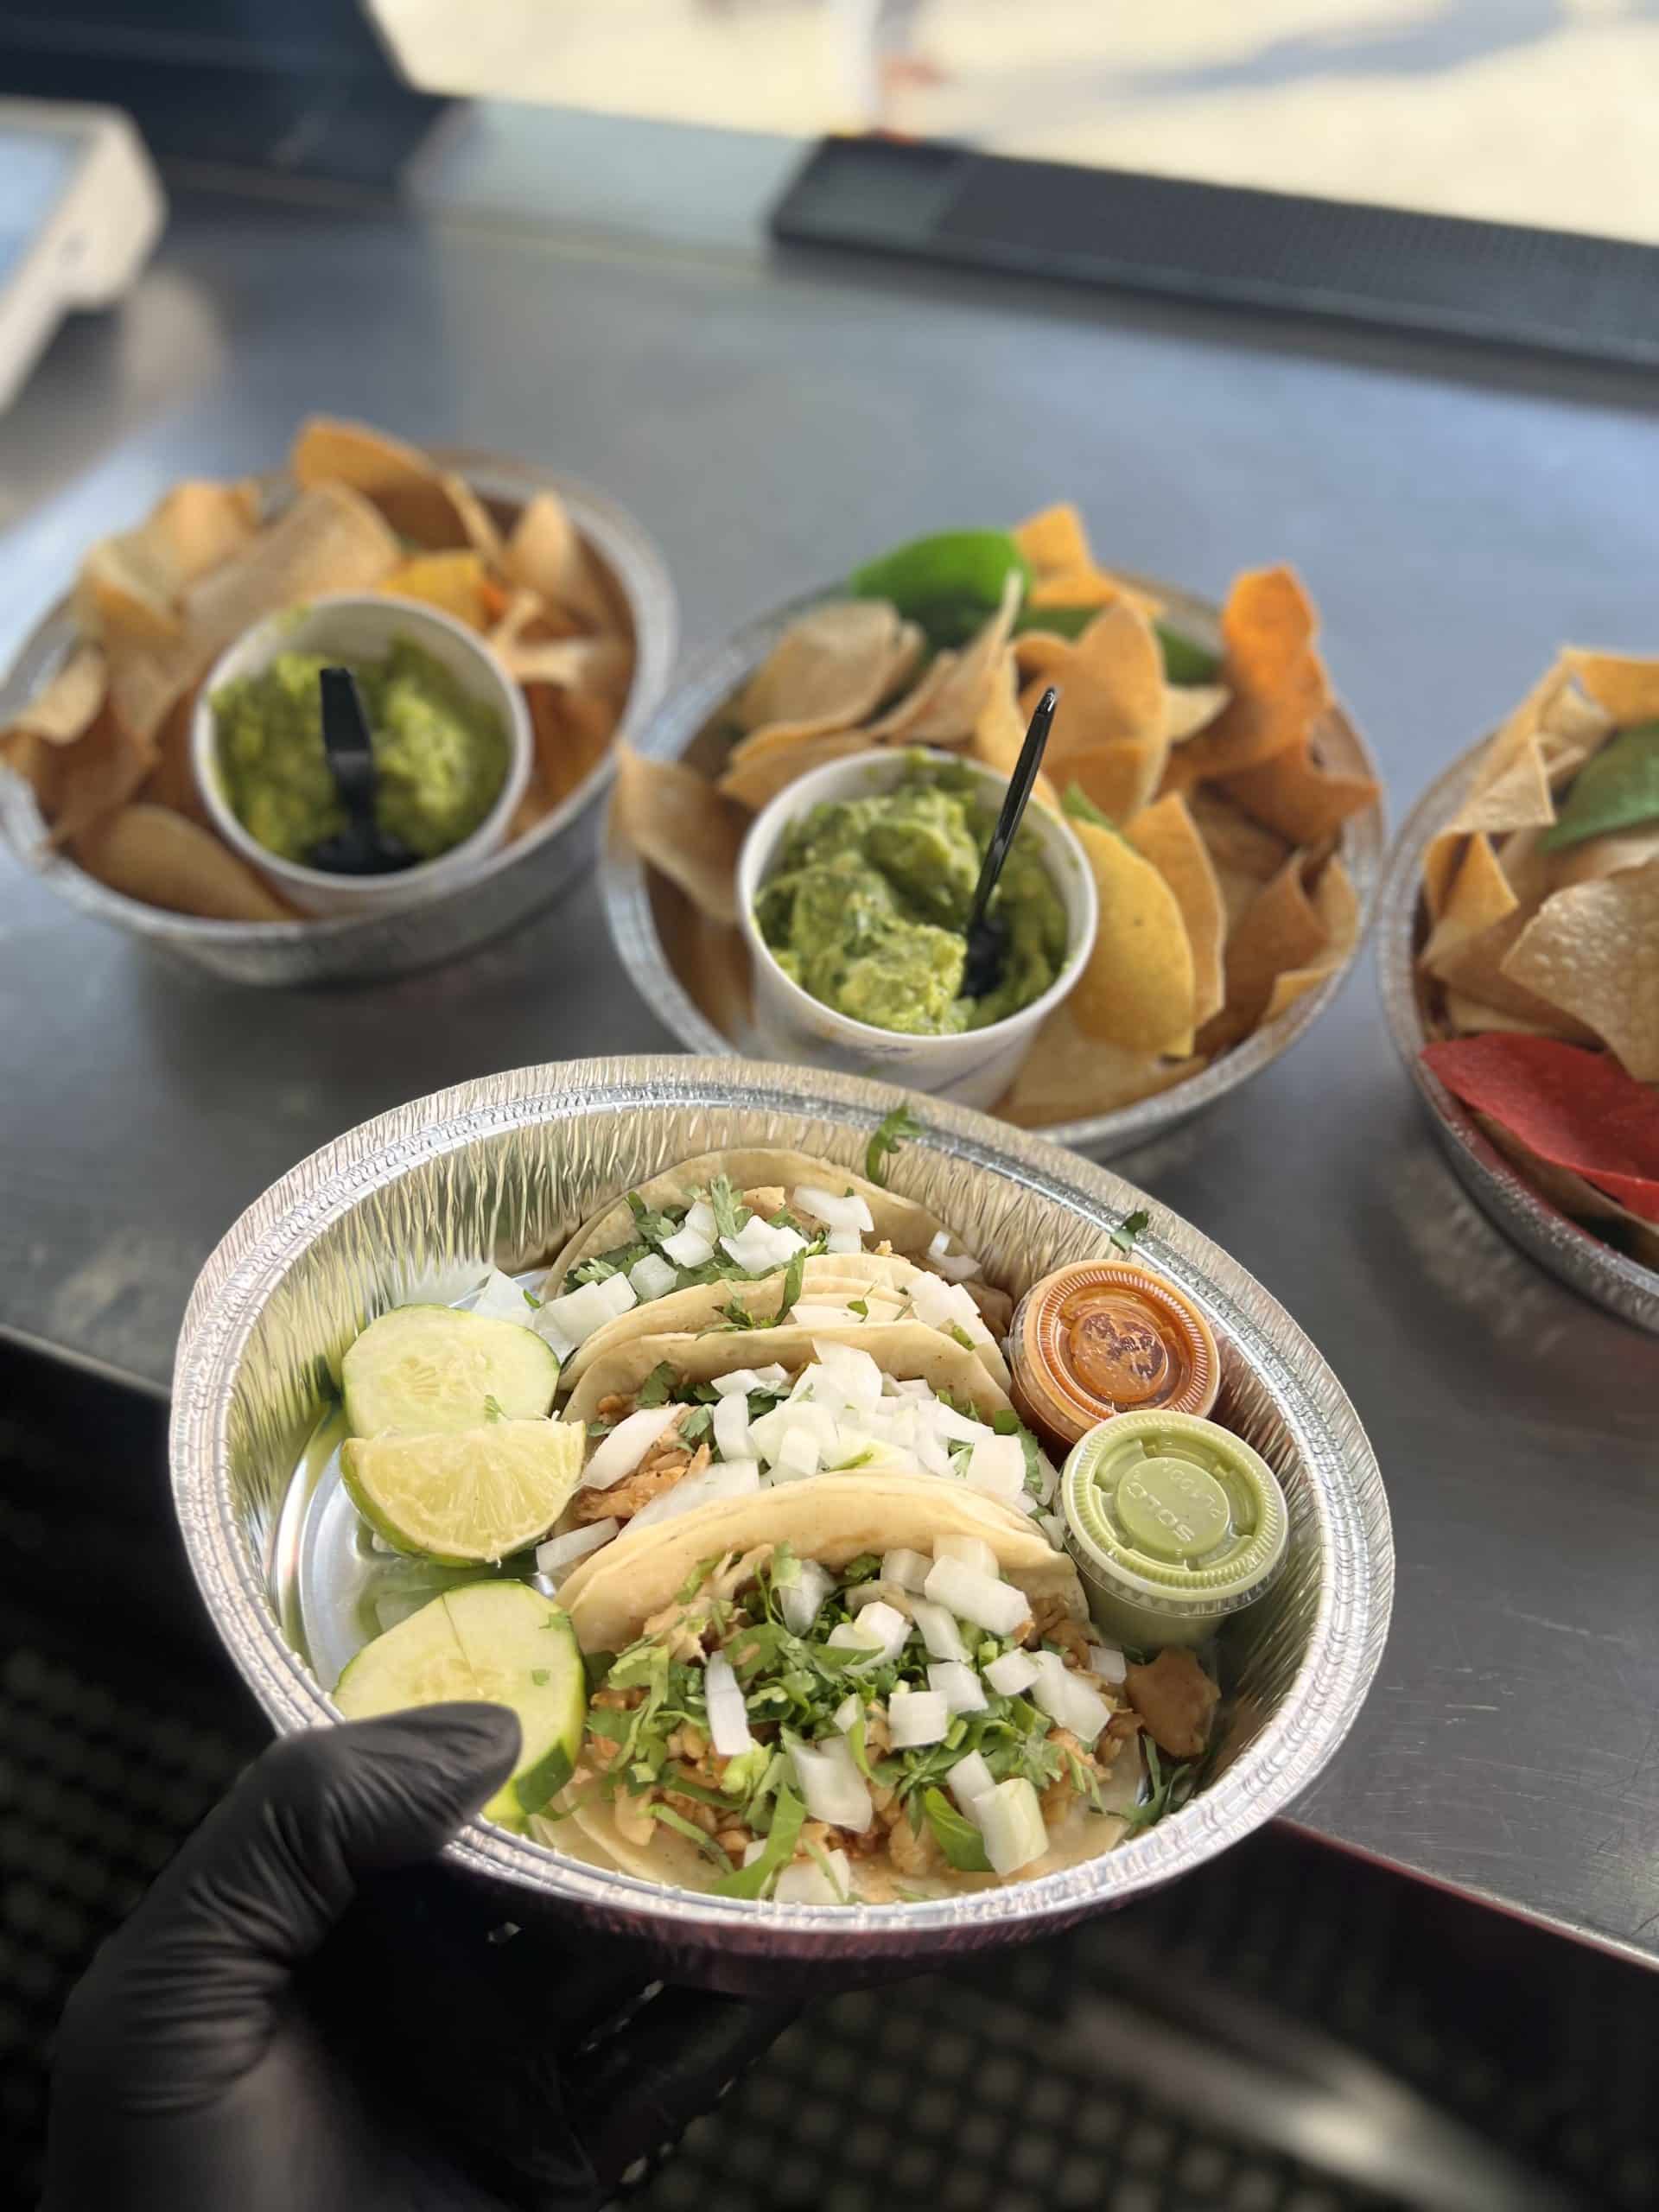 takeout plates of tacos and chips with guacamole